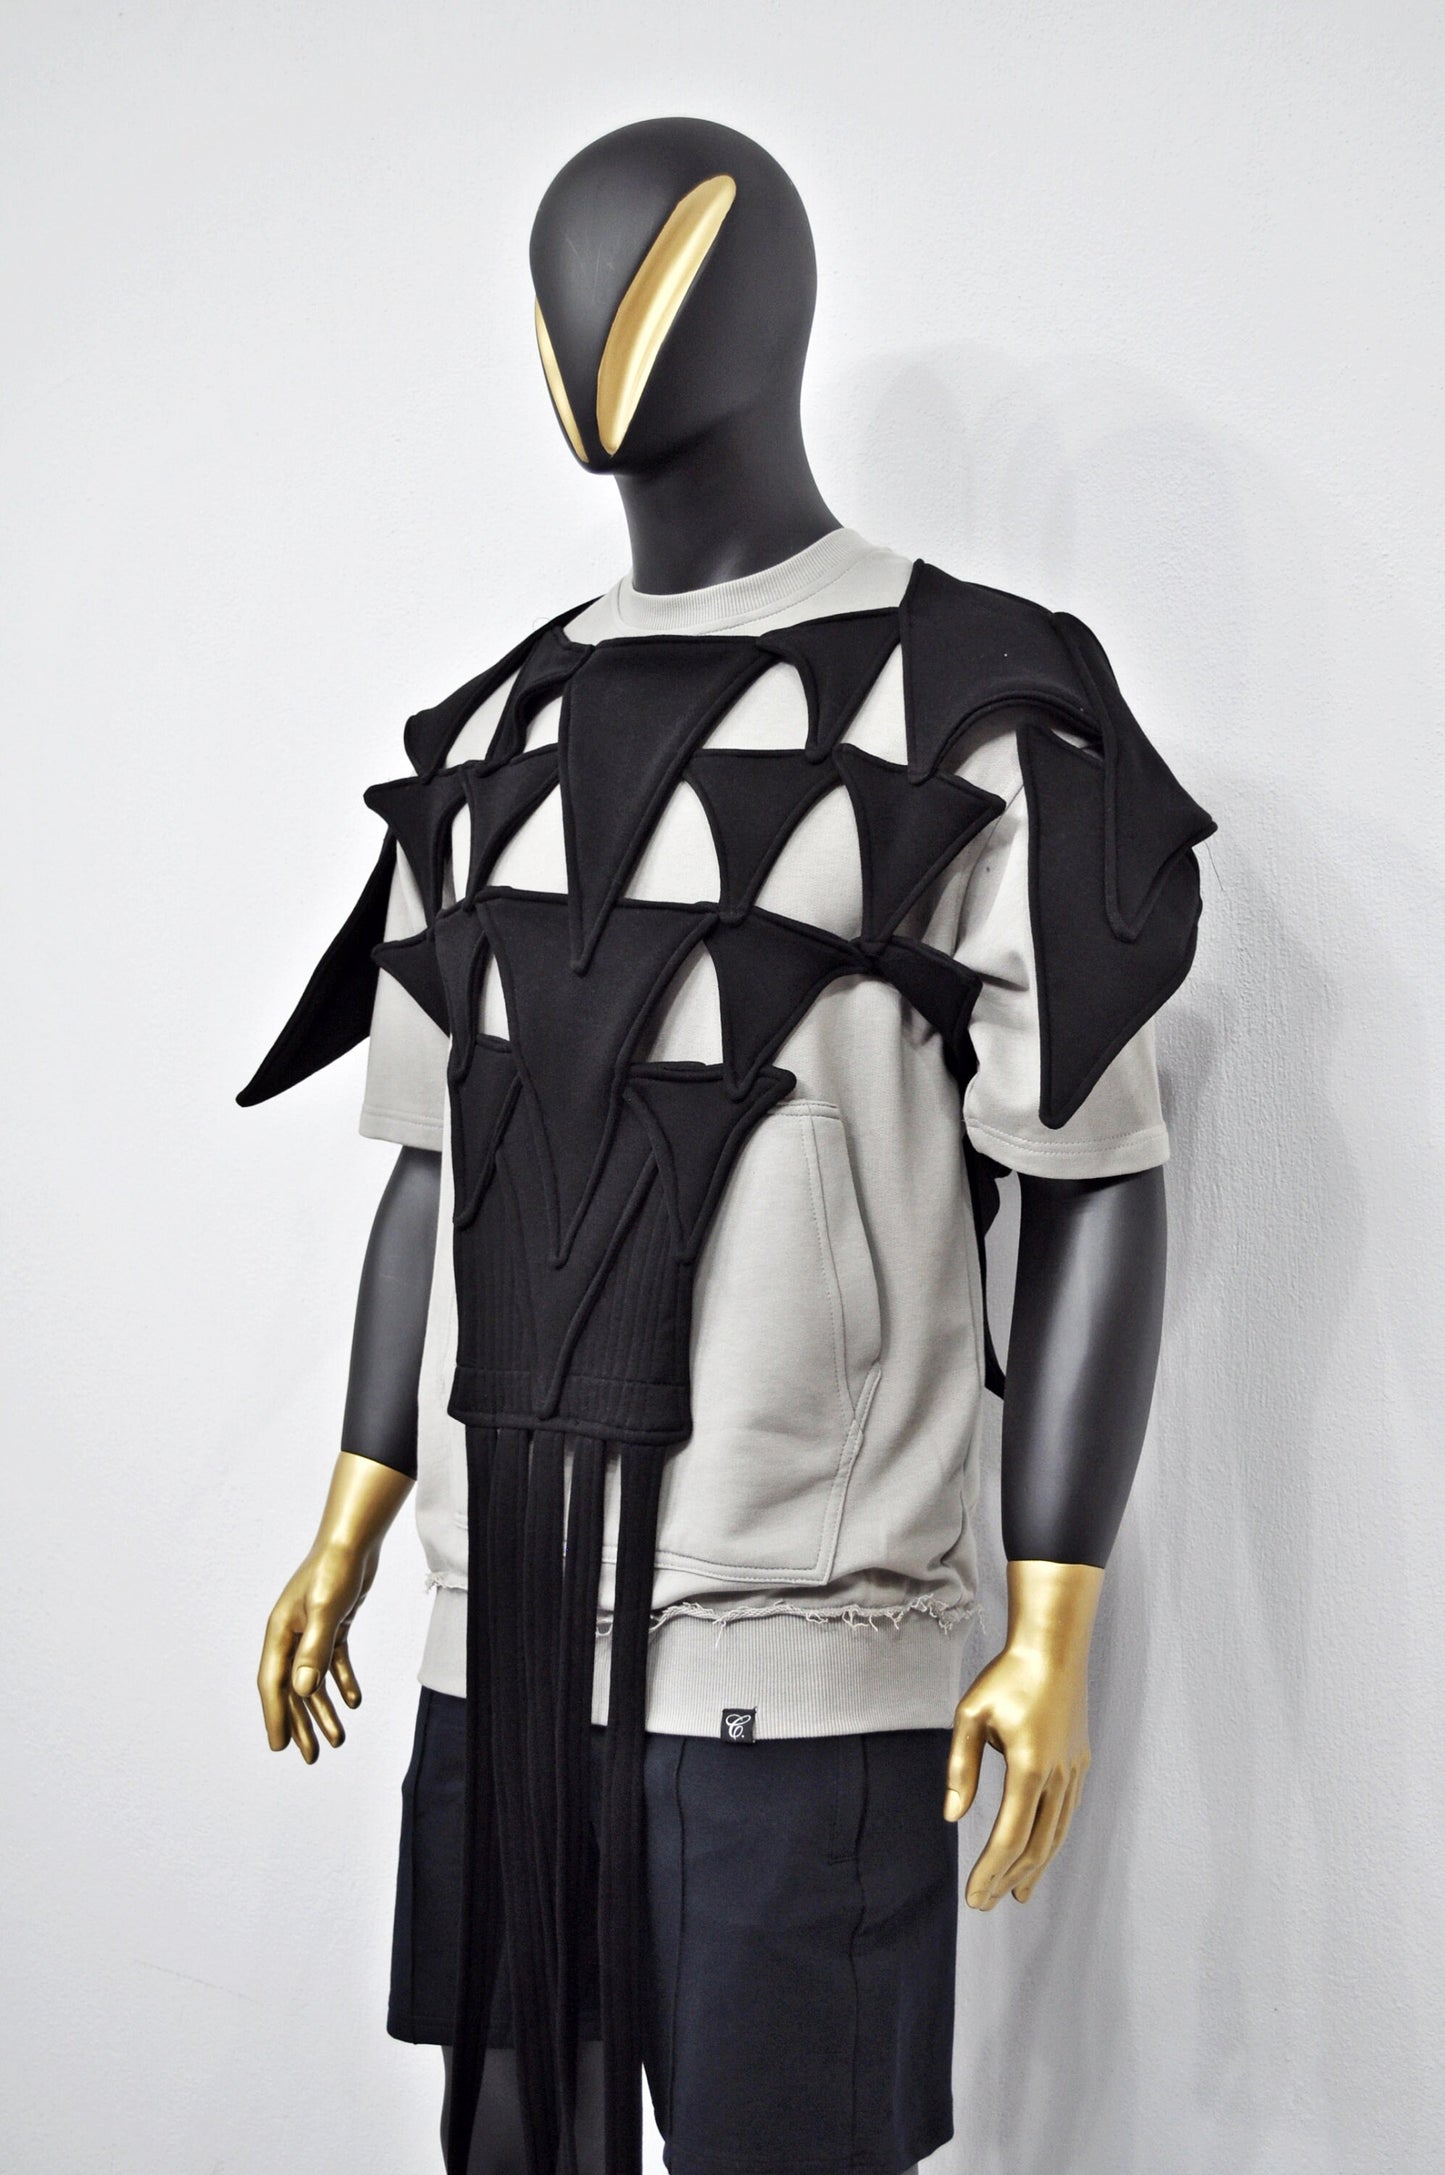 Triangle Hole Poncho,Caged Design,Spiked Cut-out Motif,Asymmetric Black Cape,Luxury Shoulder Accessories,Gothic Scarf, Cosplay,Futuristic